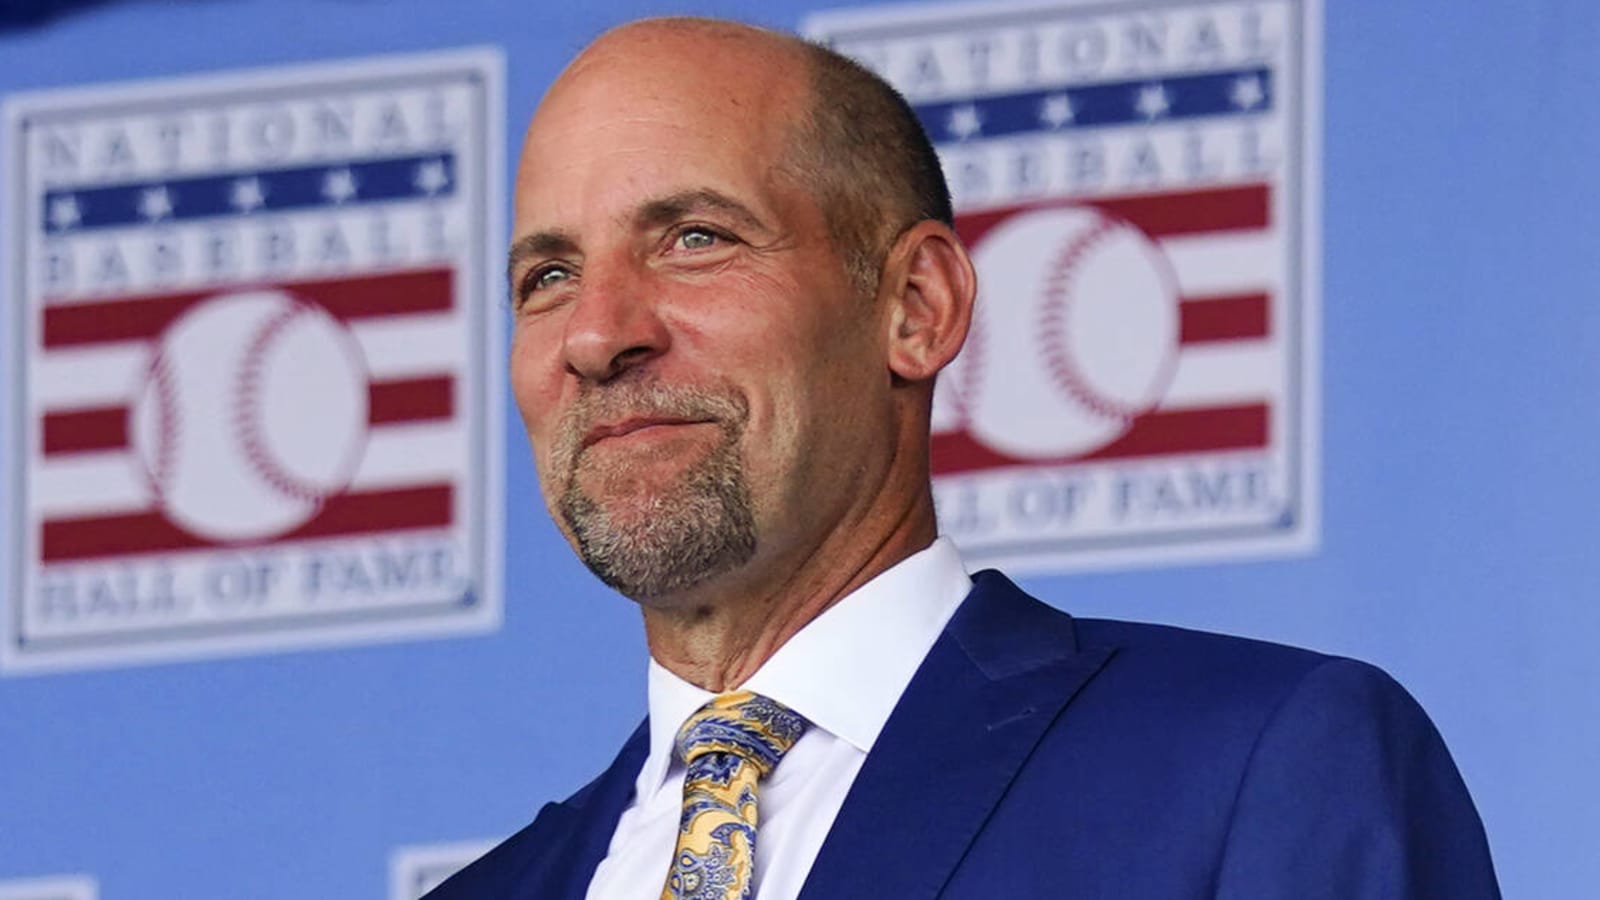 Smoltz worked ‘Field of Dreams Game' same day father died